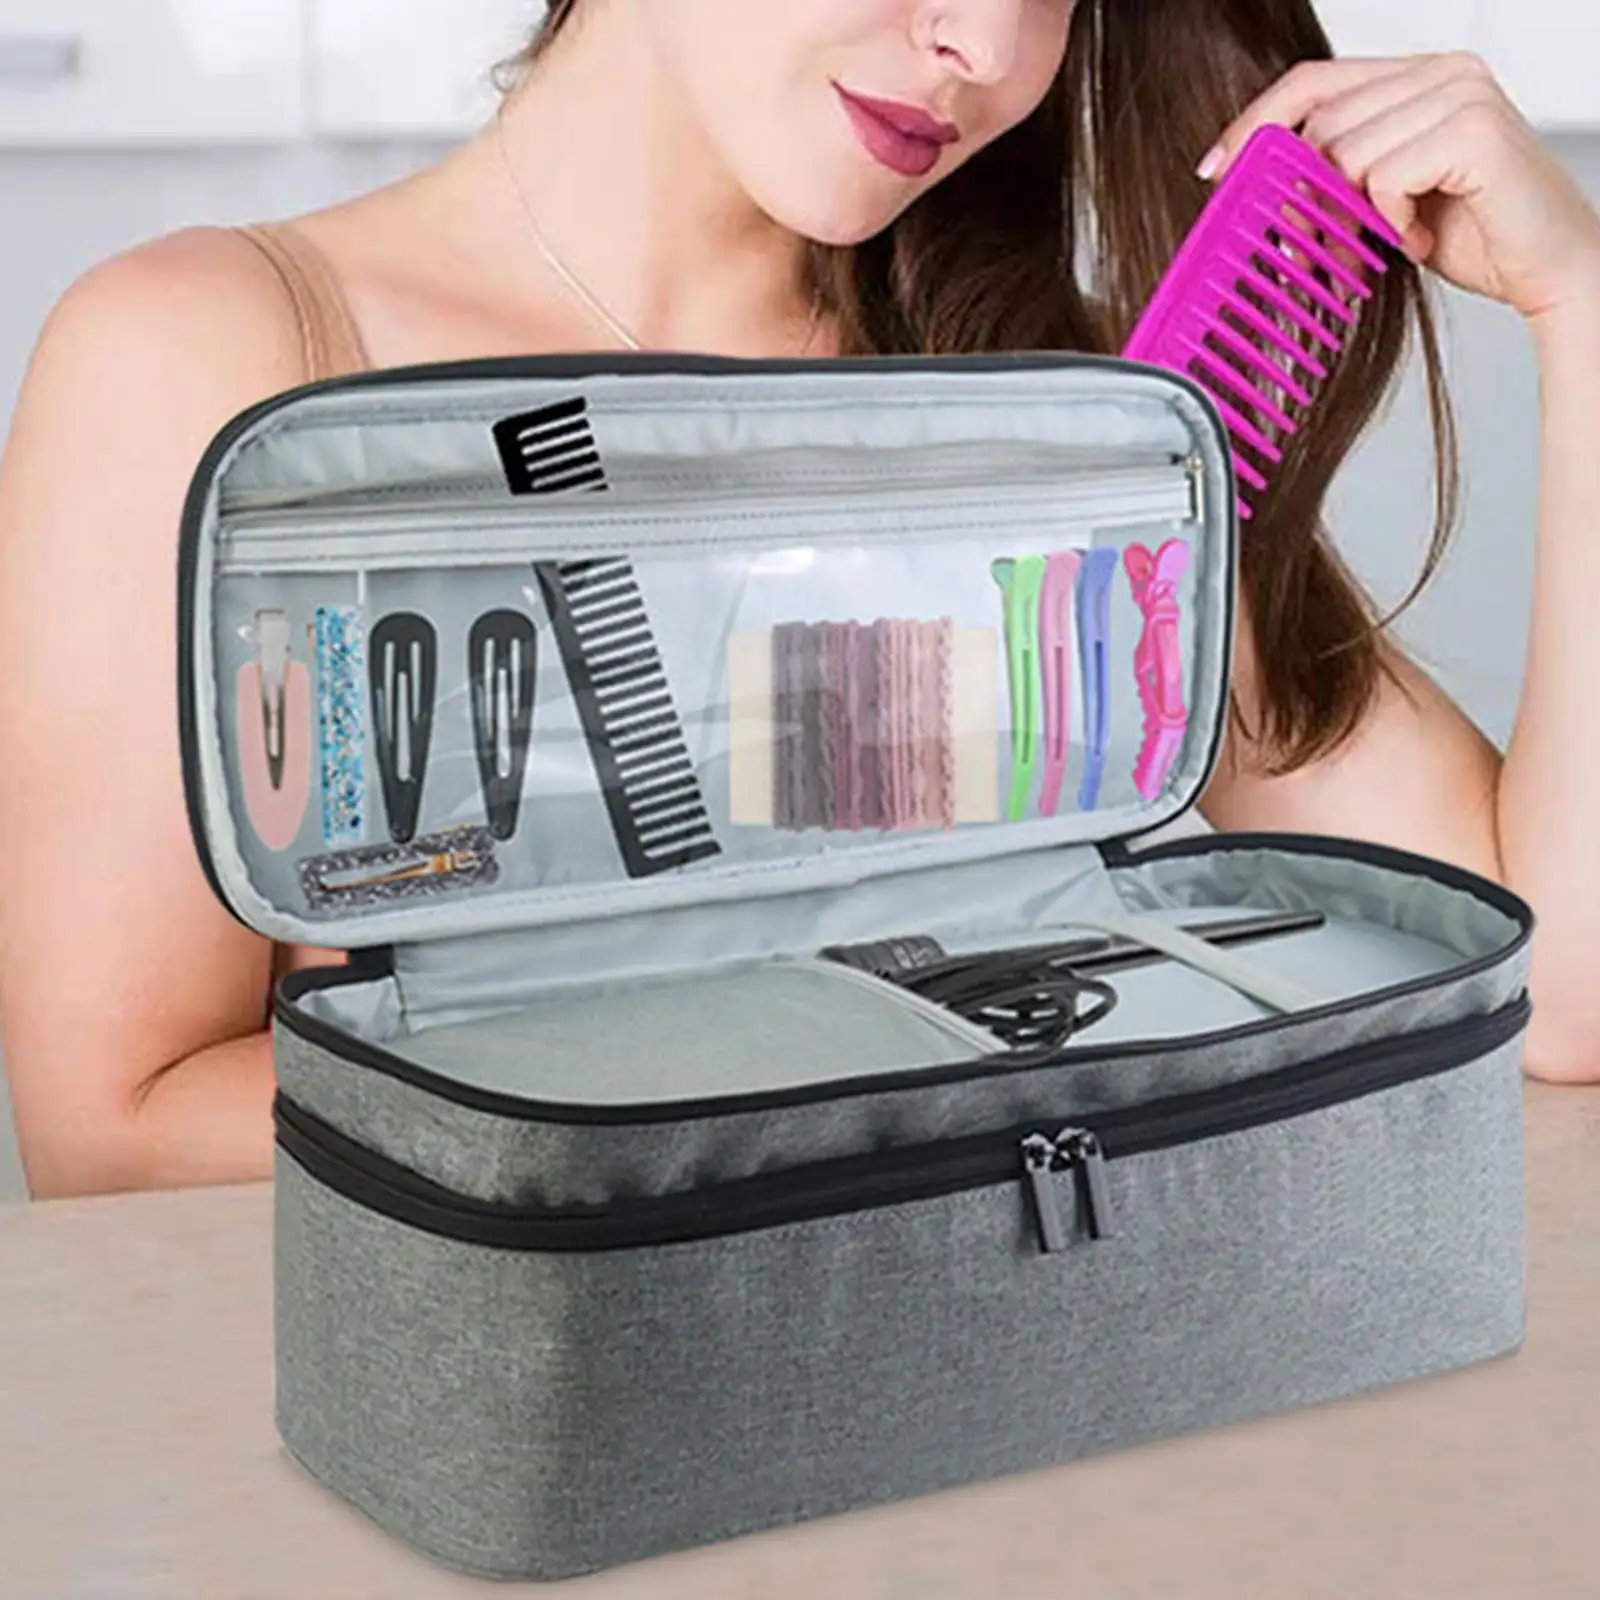 Portable Hair Dryer Storage Bag with Handle Large Makeup Case for Bathroom Business Trip